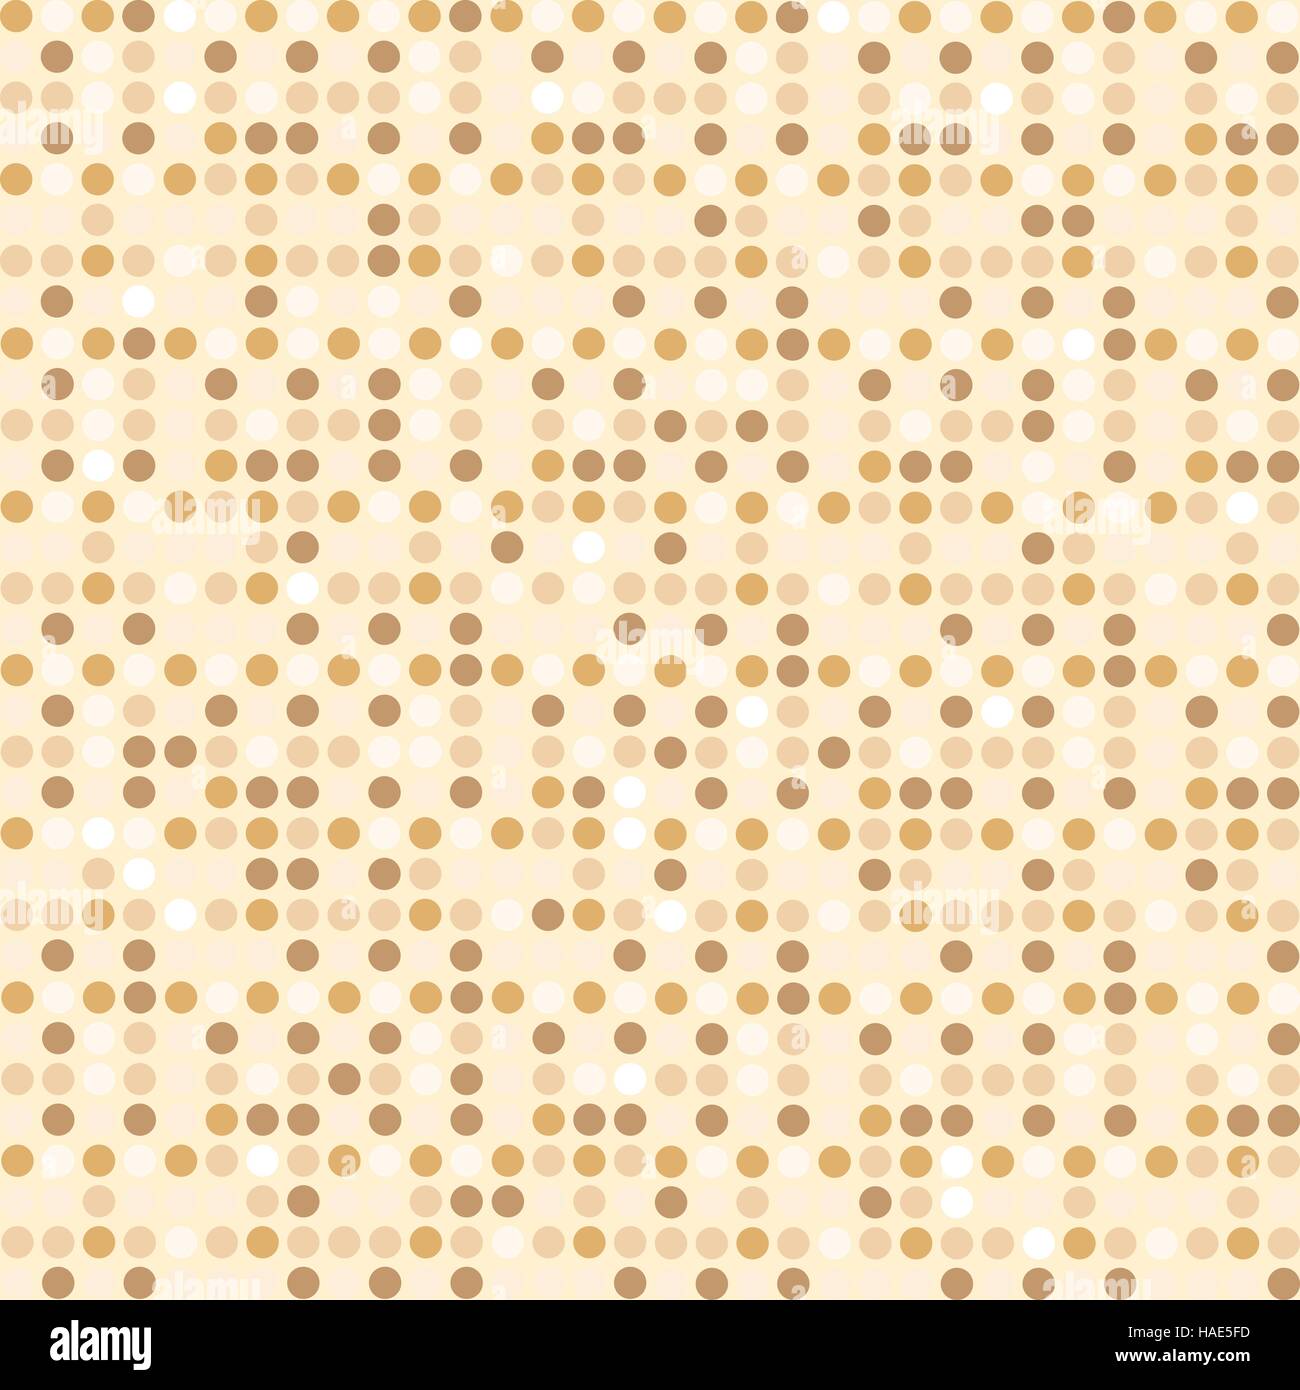 Digital point light brown seamless background pattern Stock Vector